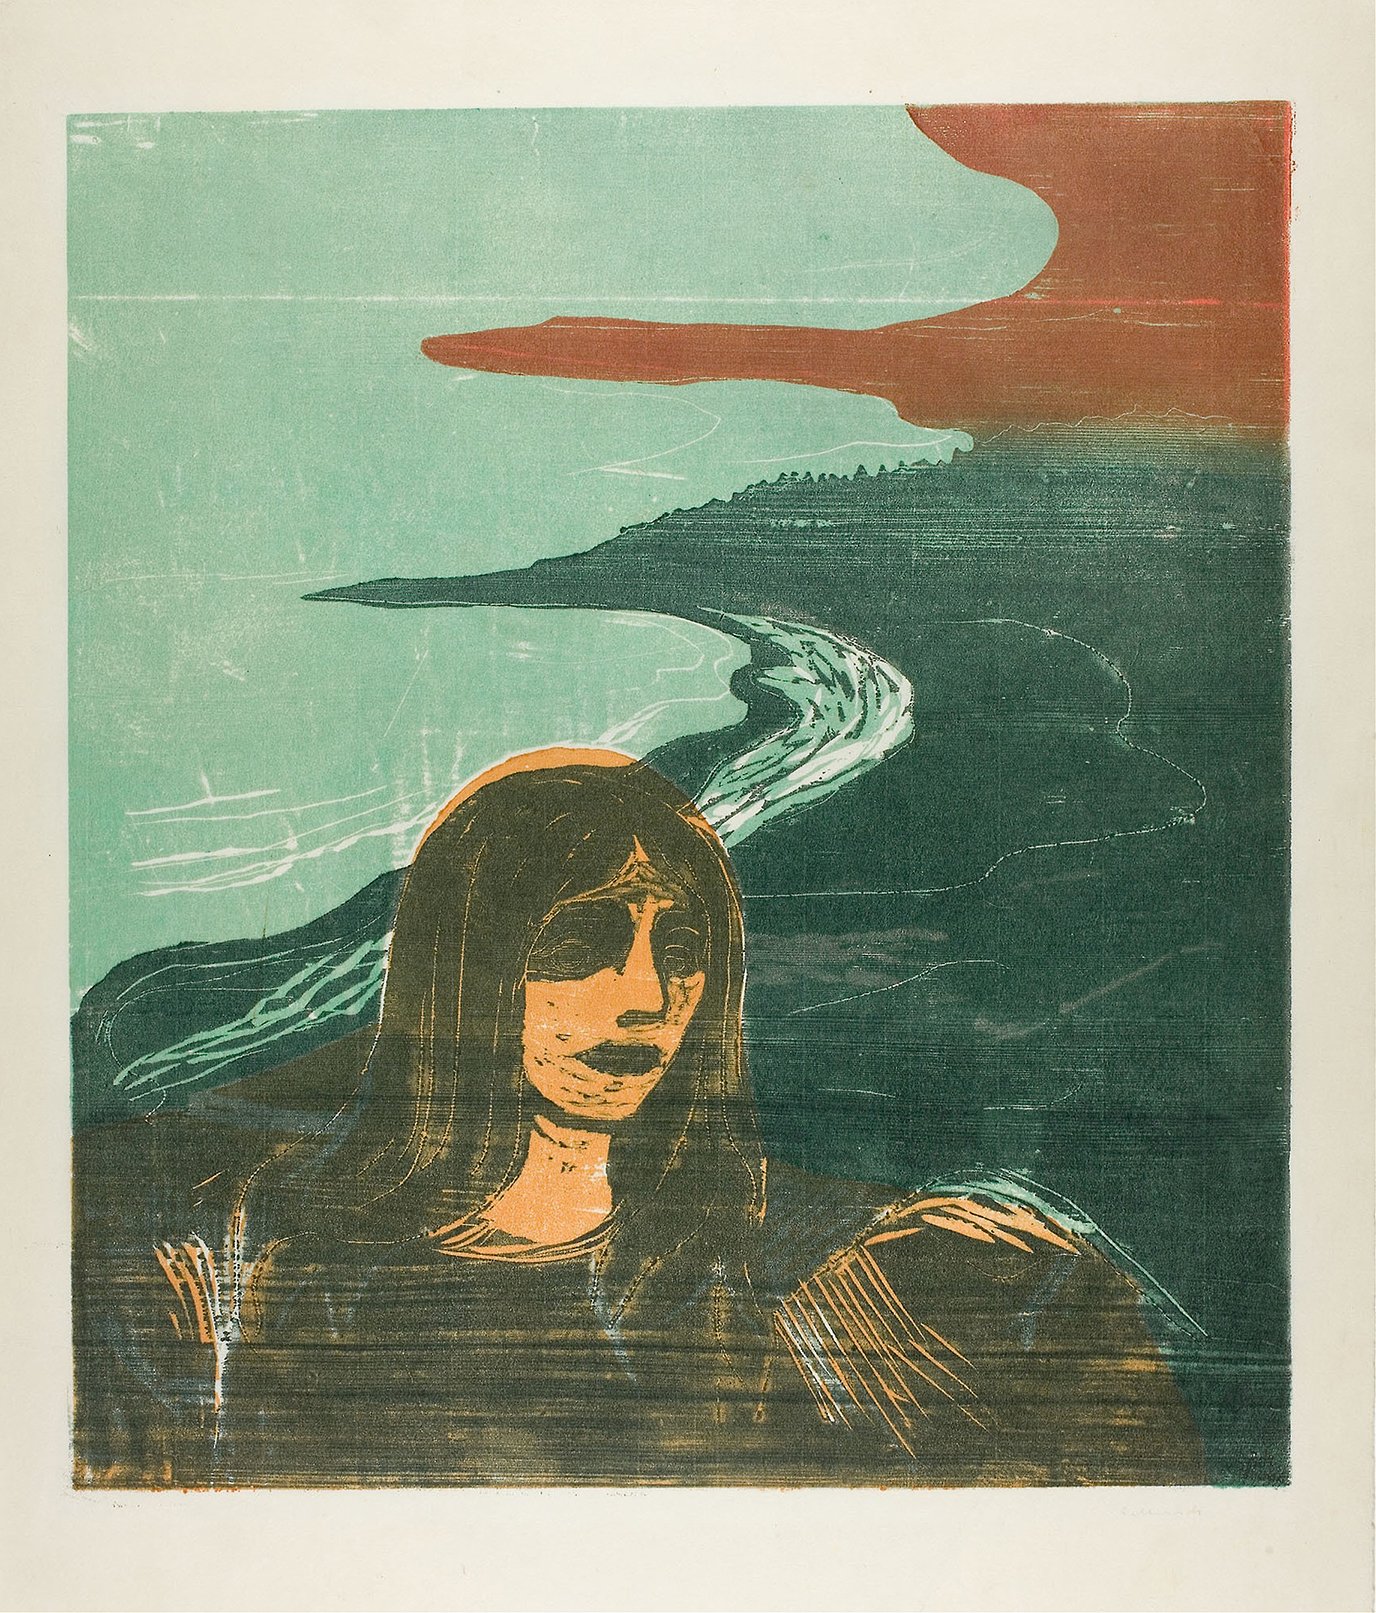 Woman’s Head against the Shore (1899)